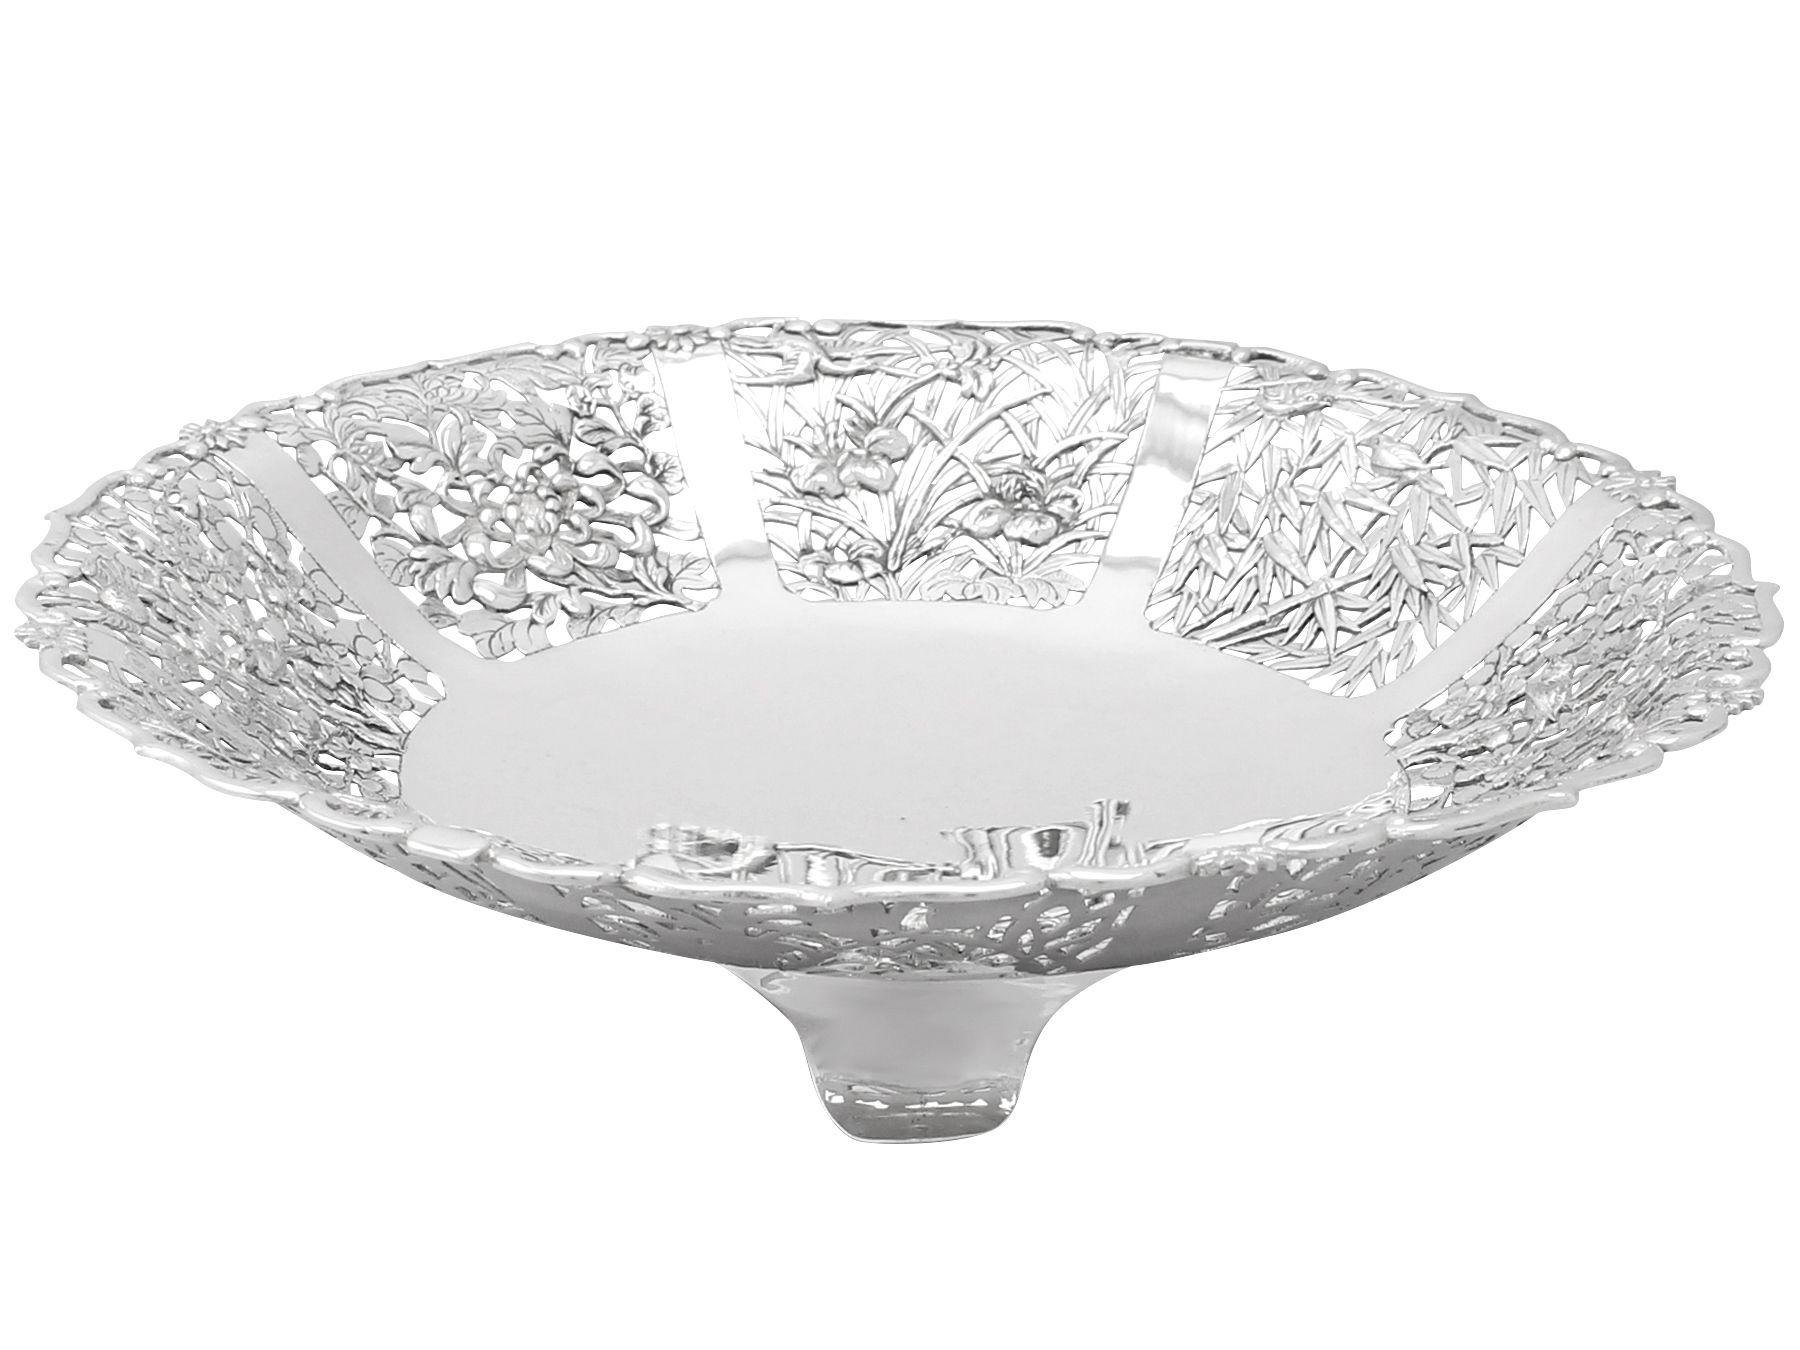 An exceptional, fine and impressive, large antique Chinese Export Silver fruit dish; part of our Chinese / Asian silverware collection.

This exceptional antique Chinese Export Silver (CES) fruit dish has a circular rounded form onto three plain